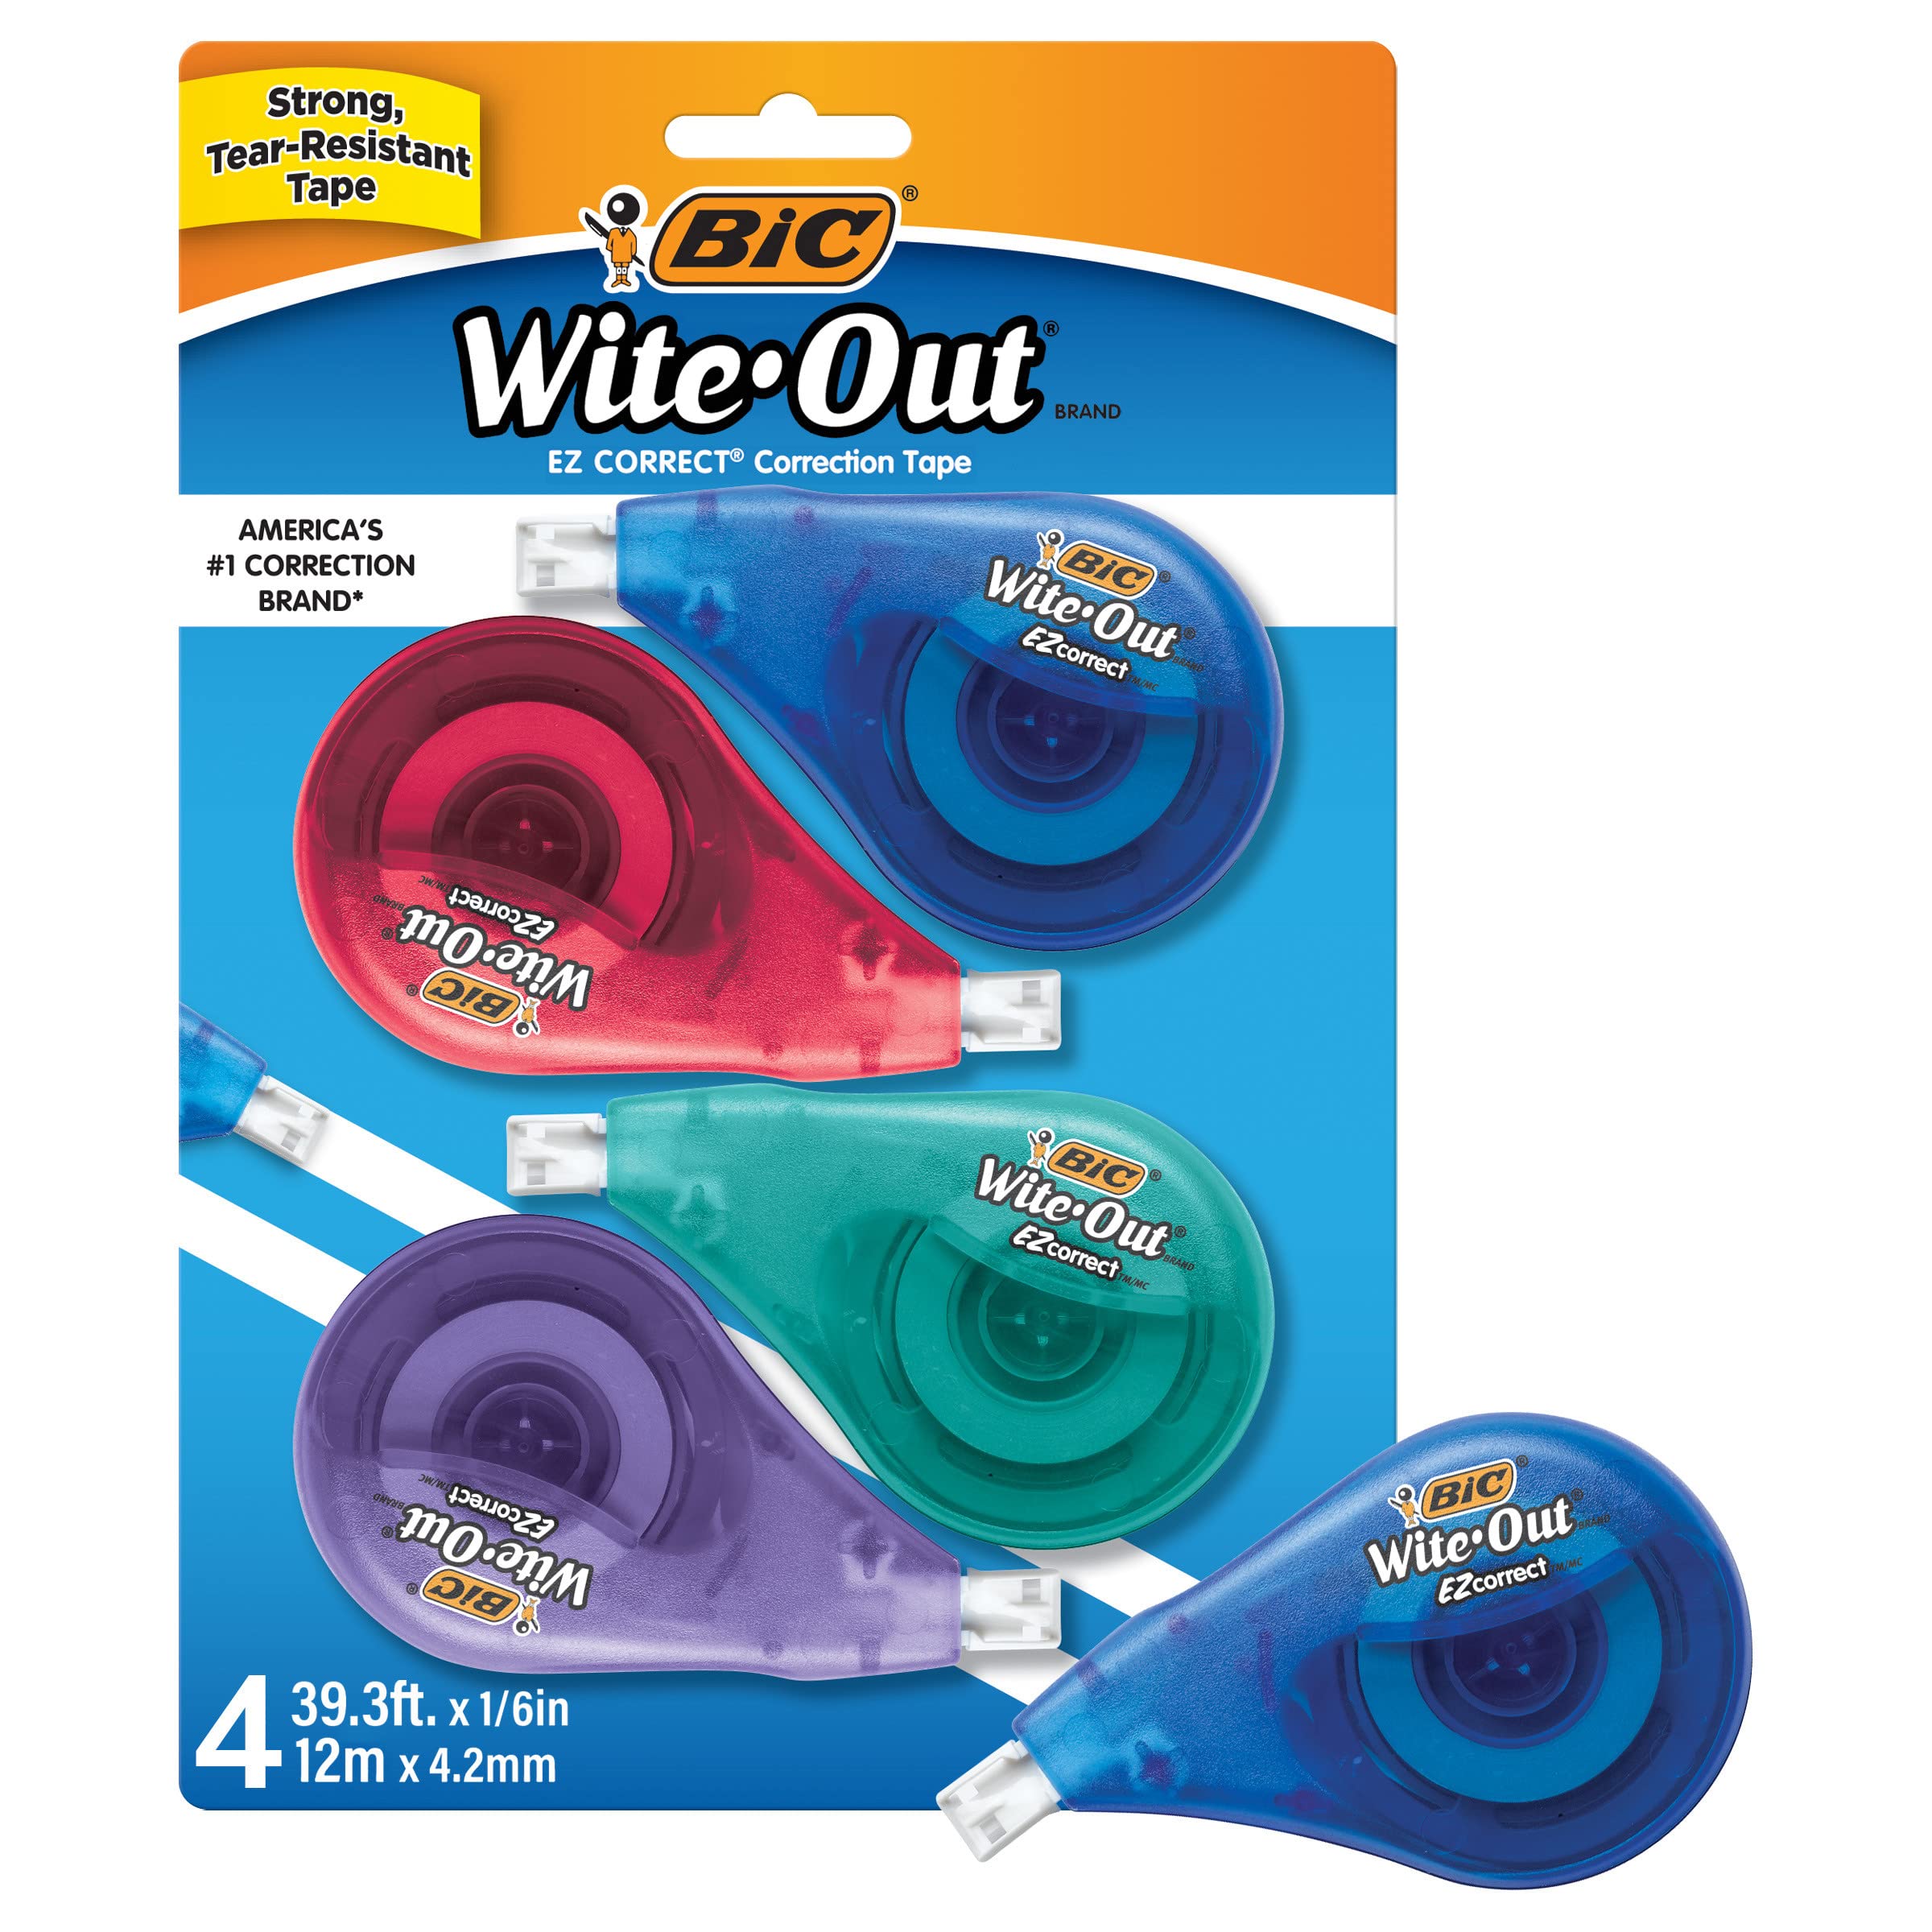 Book Cover BIC Wite-Out Brand EZ Correct Correction Tape, 19.8 Feet, 4-Count Pack of white Correction Tape, Fast, Clean and Easy to Use Tear-Resistant Tape Office or School Supplies 4 Count